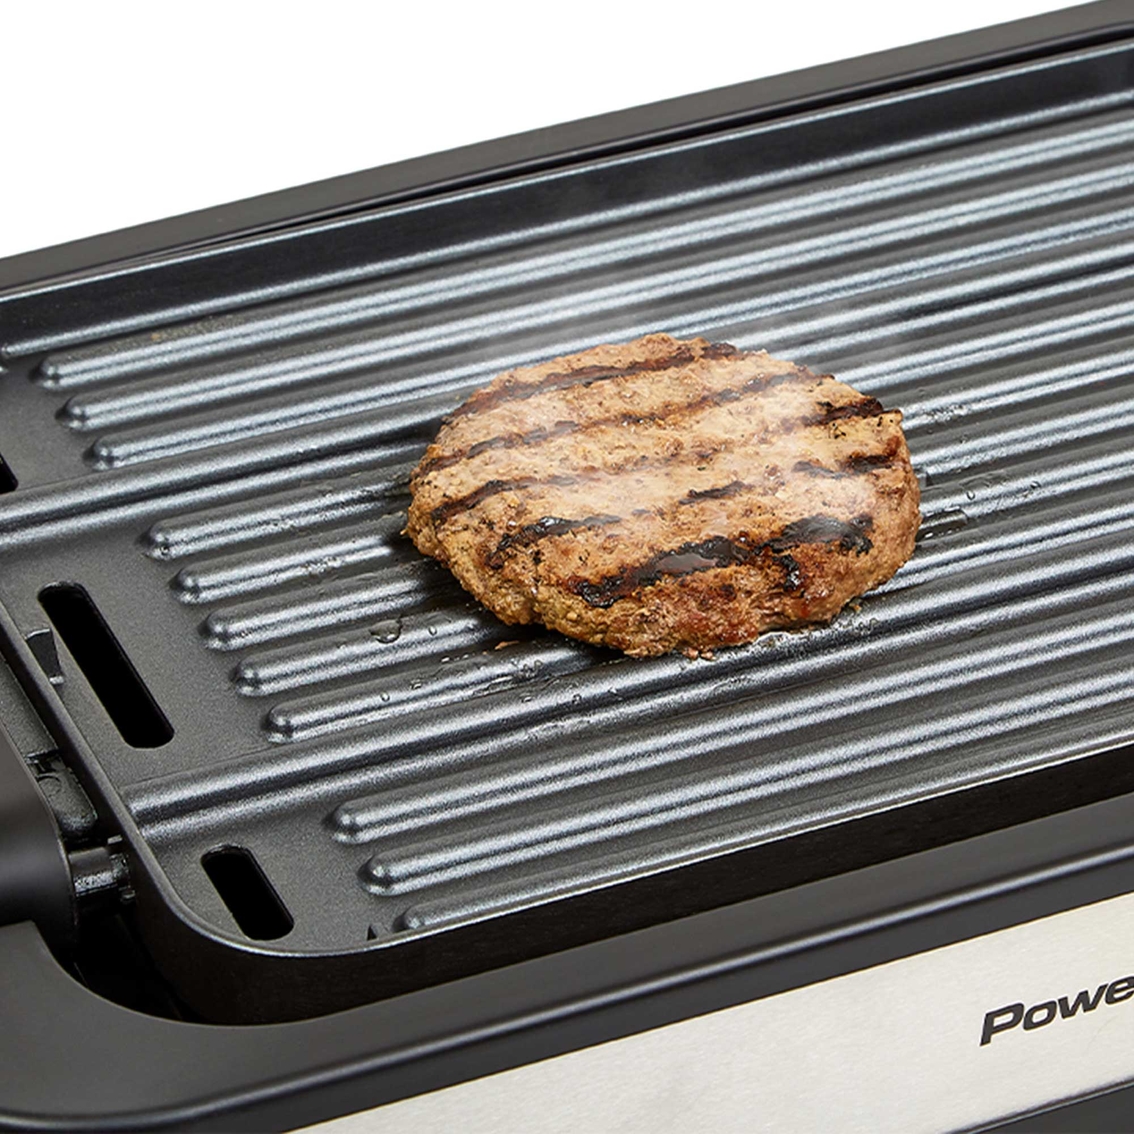 Tristar As Seen On Tv Powerxl Indoor Grill And Griddle, Indoor Grills &  Griddles, Furniture & Appliances